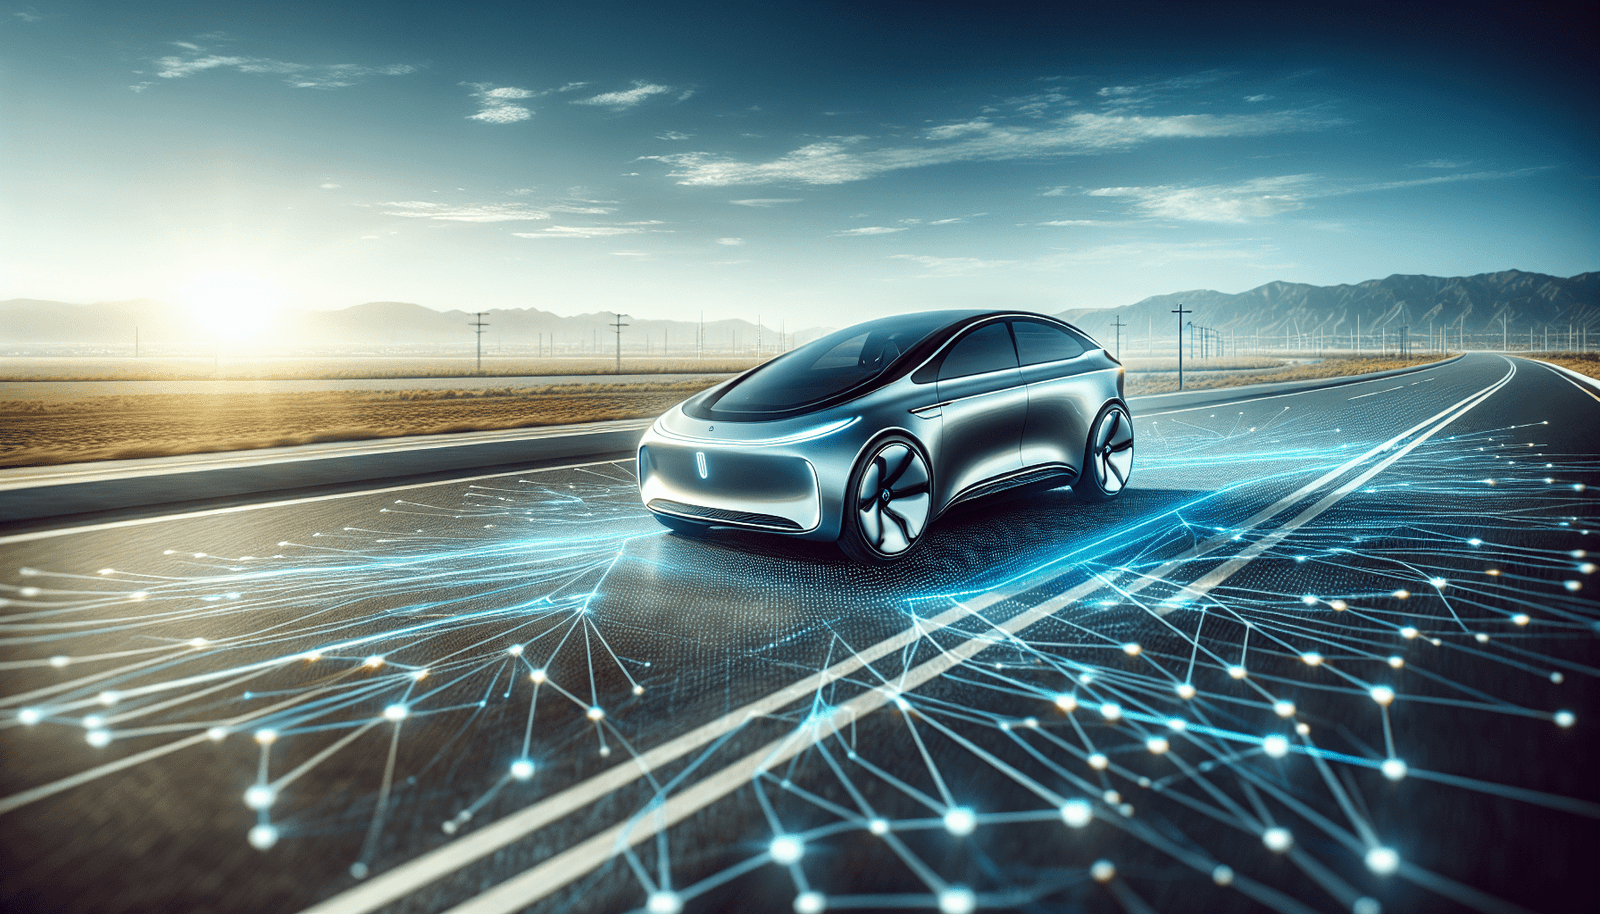 What Advancements Are Happening In Electric Vehicle Autonomous Driving Technology?